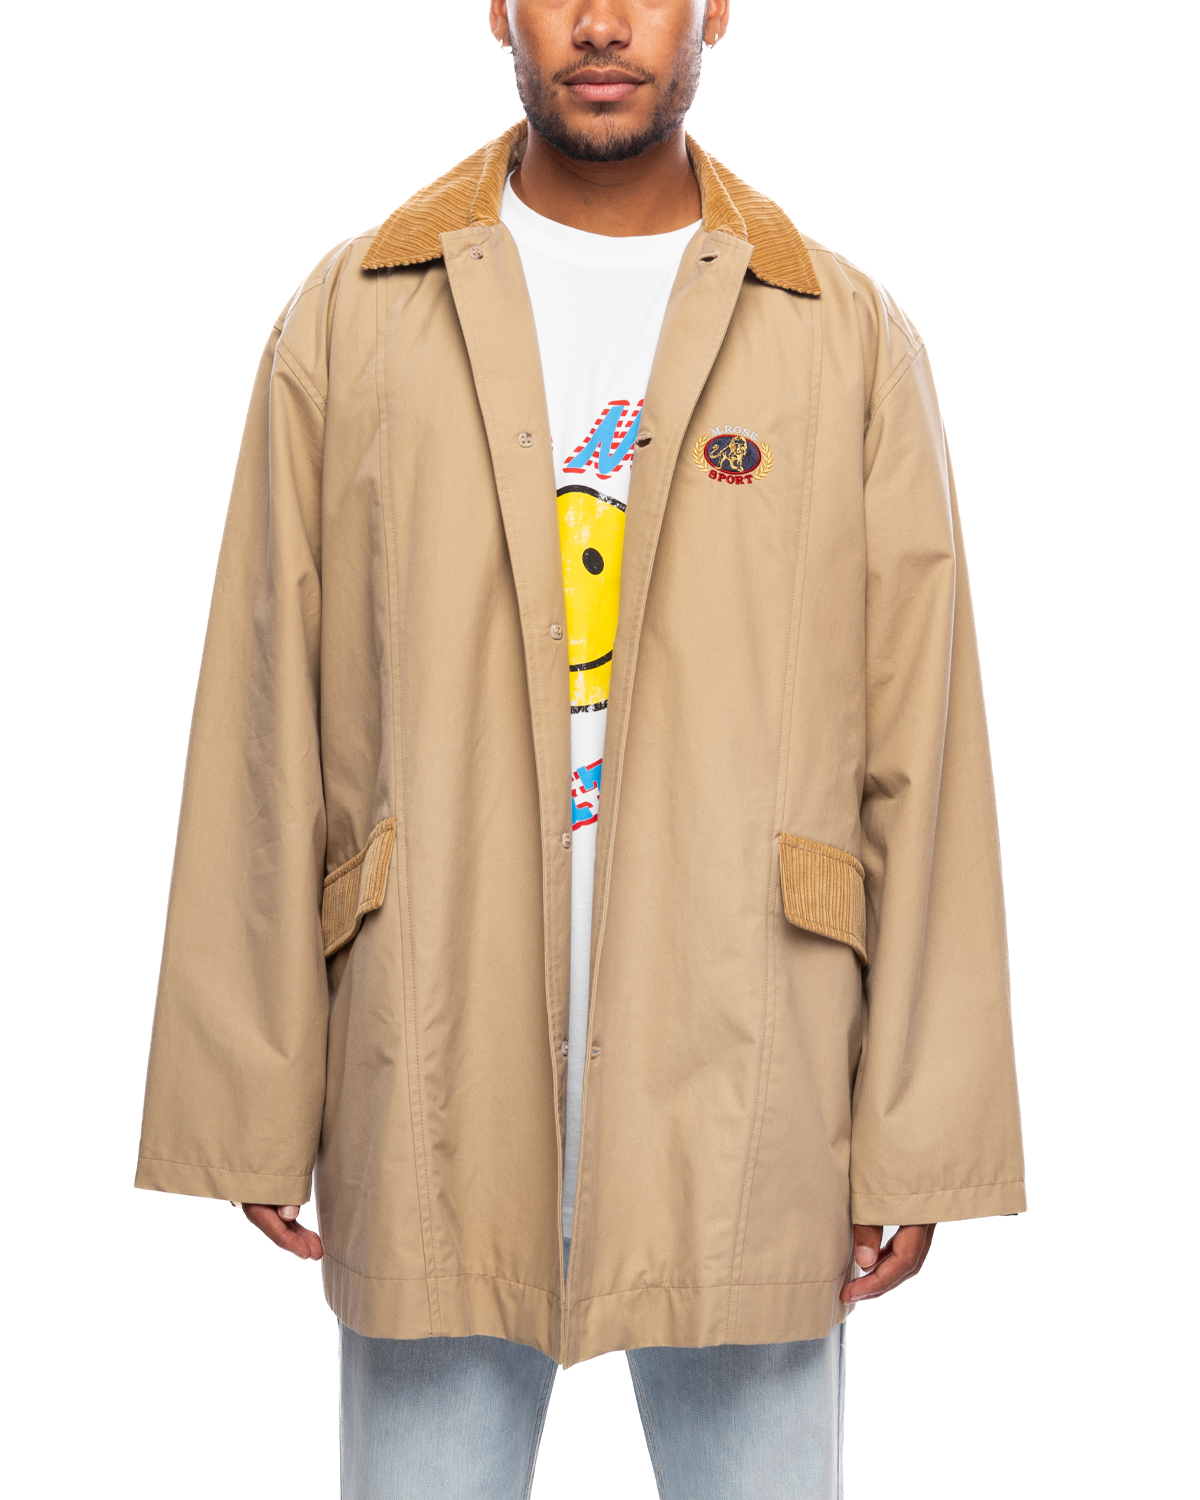 Hanging Sports Casual Jacket Beige